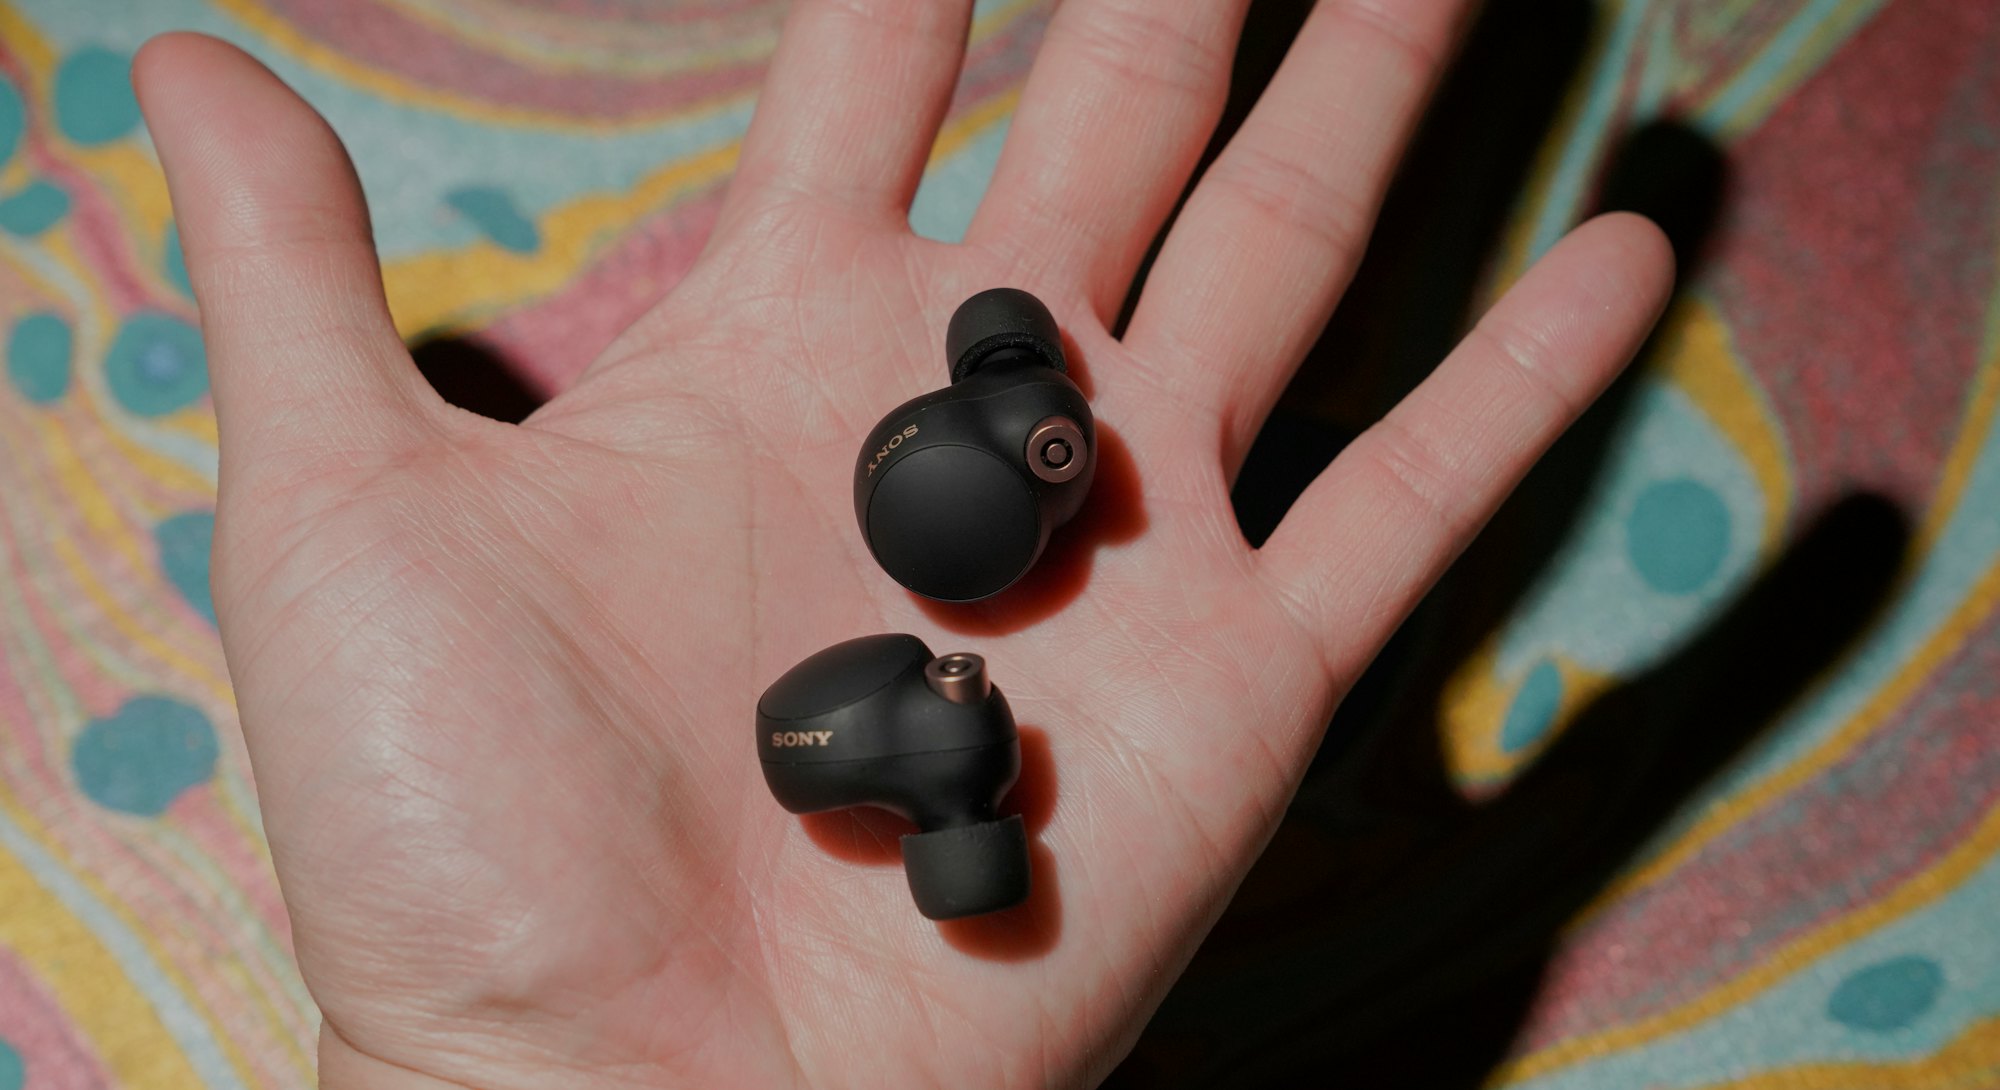 Sony WF-1000XM4 review: the best active noise-cancellation in any wireless earbuds